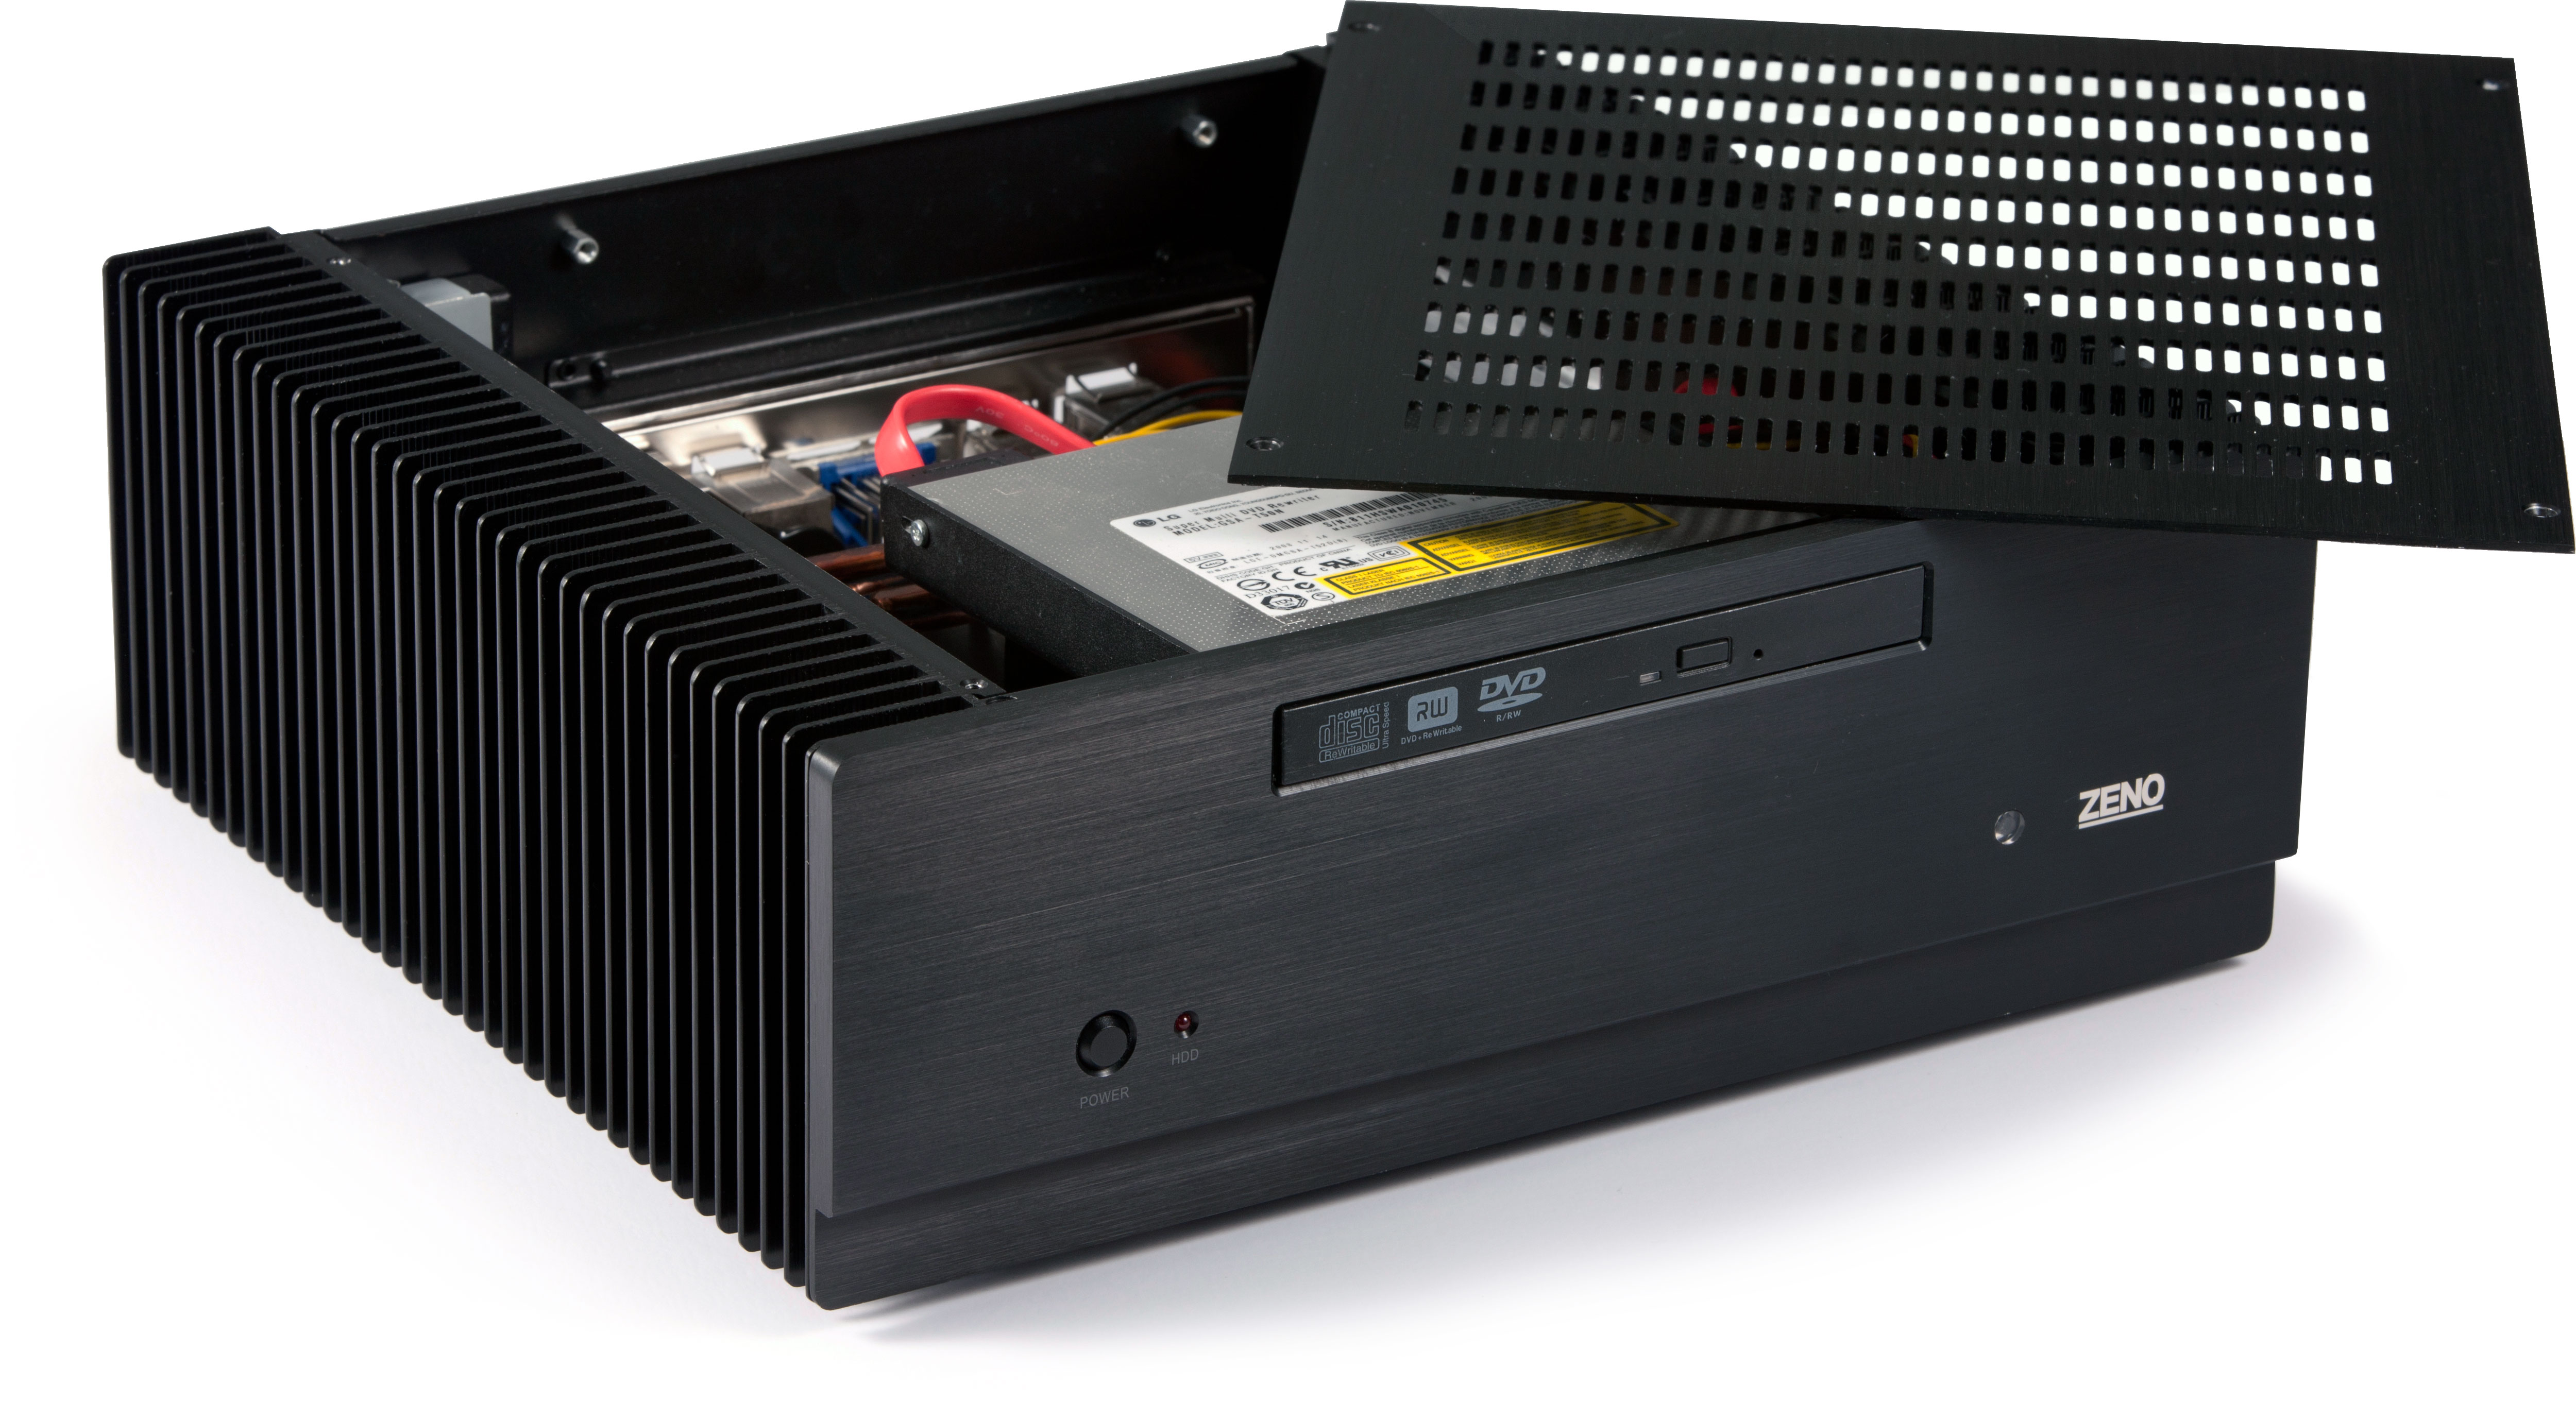 Nt tx2000 fanless media case with heatpipe cpu cooler for Case itx fanless